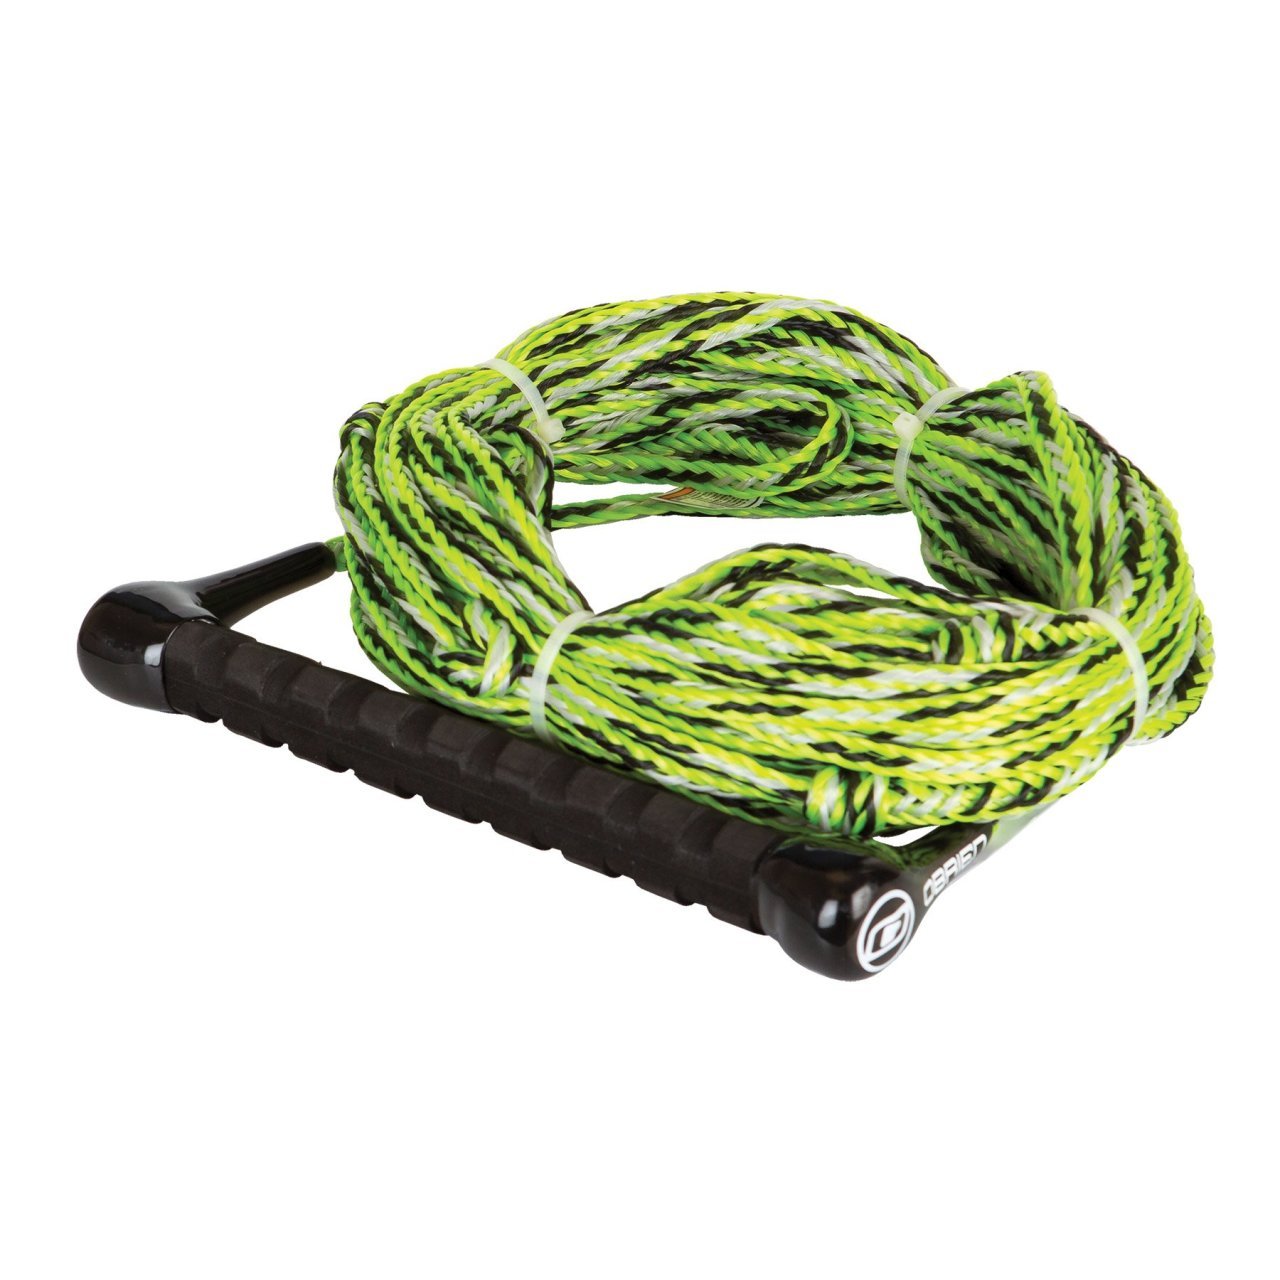 OBRIEN 2-SECTION COMBO ROPE & HANDLE